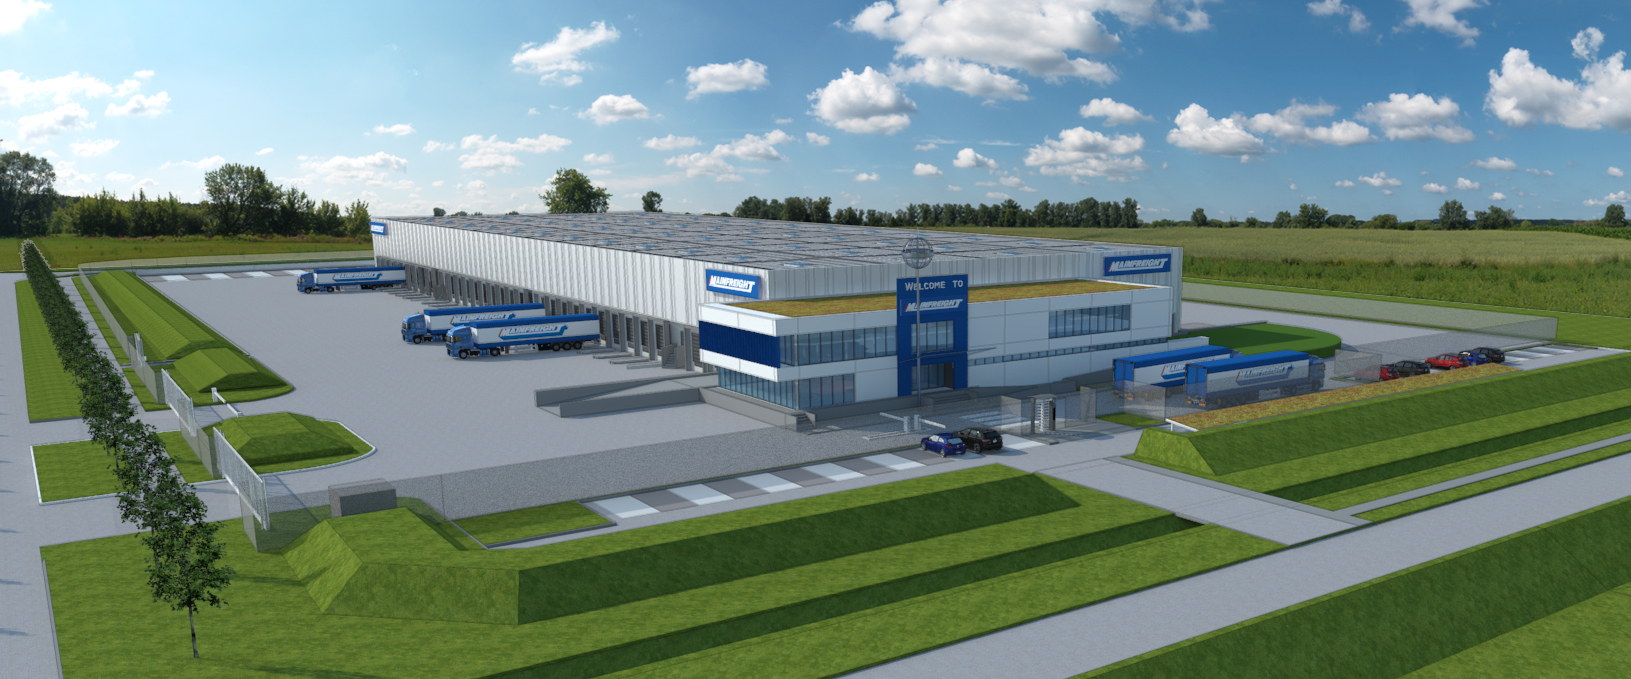 Mainfreight opens business park Eiland Zwijnaarde Belgium with first Logistic facility